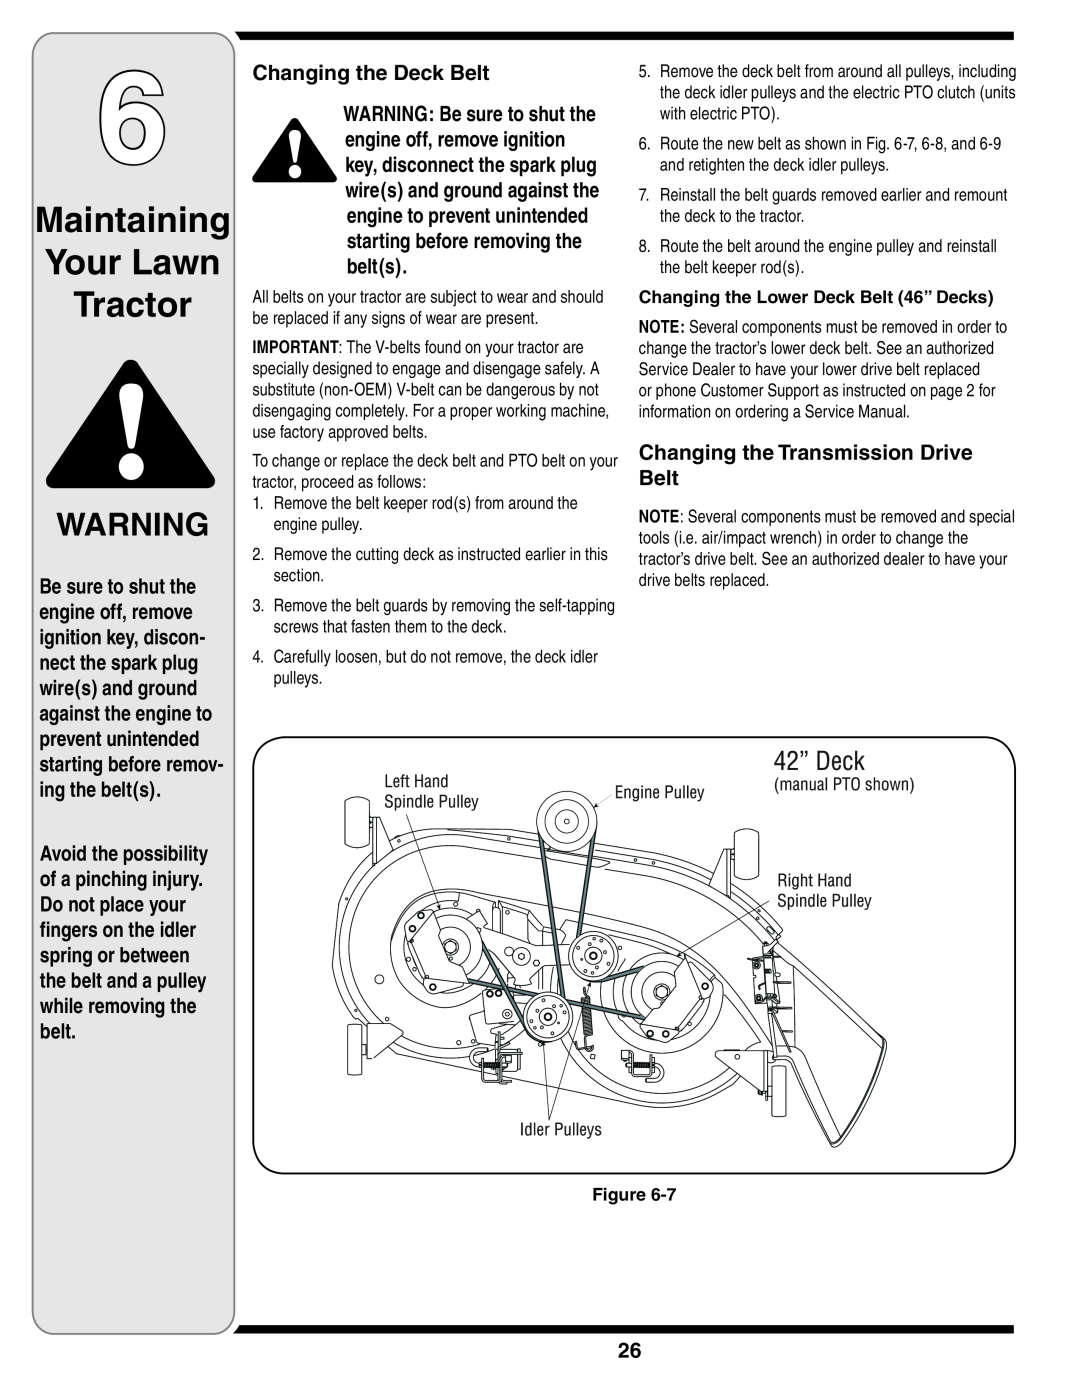 White Outdoor 606 manual Maintaining Your Lawn Tractor, Changing the Deck Belt, Changing the Transmission Drive Belt 